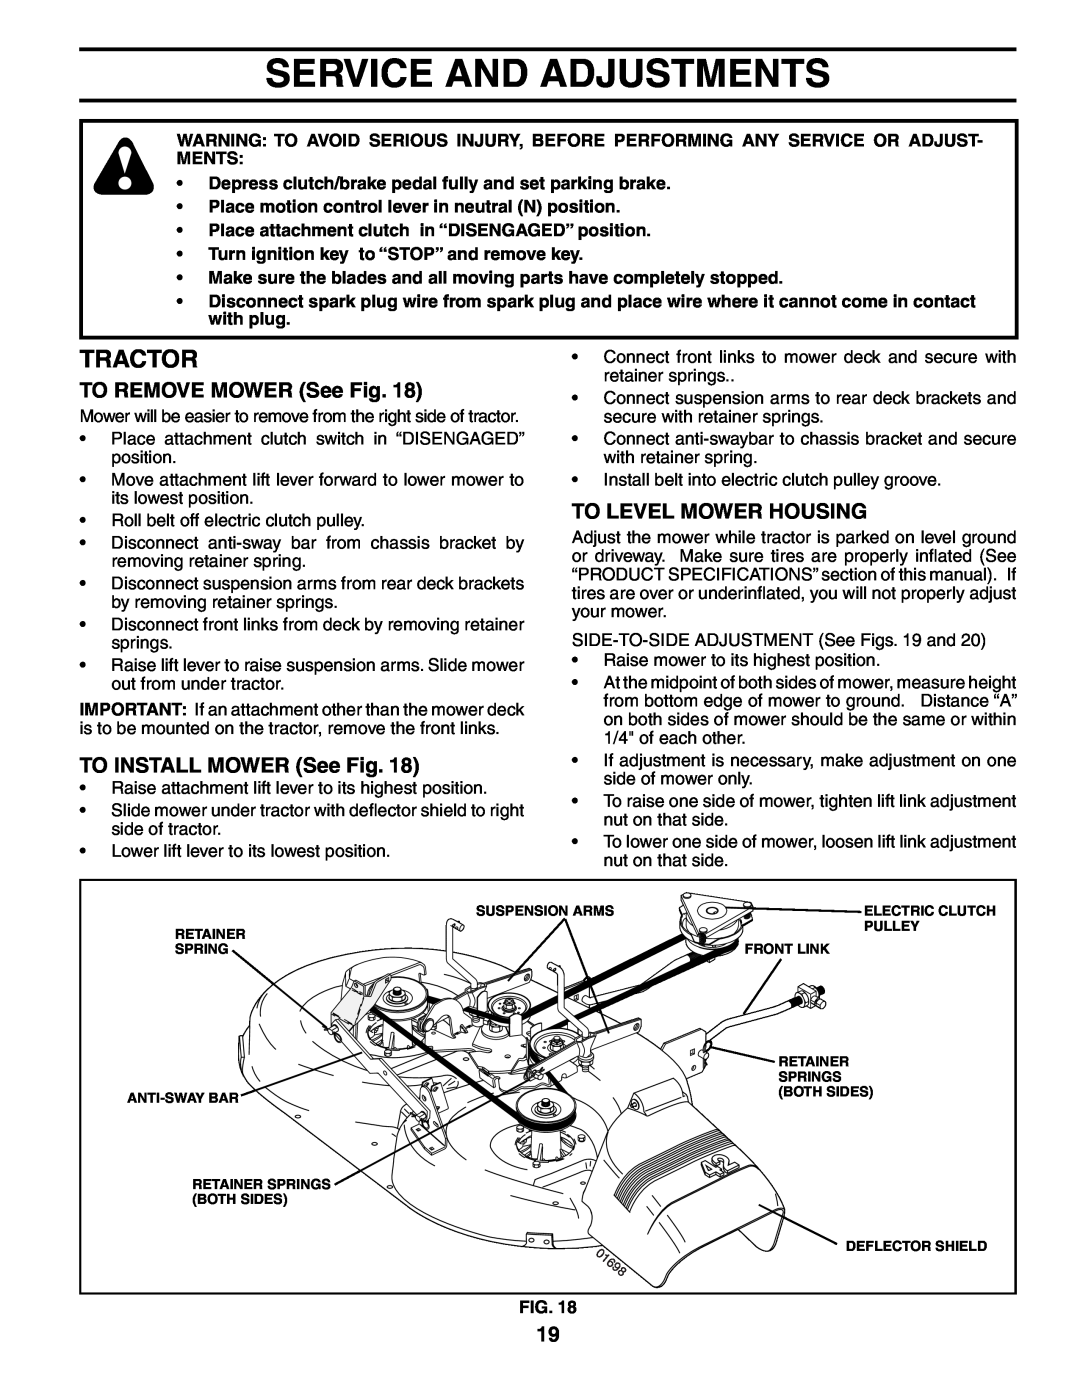 Poulan 186914 Service And Adjustments, TO REMOVE MOWER See Fig, TO INSTALL MOWER See Fig, To Level Mower Housing, Tractor 